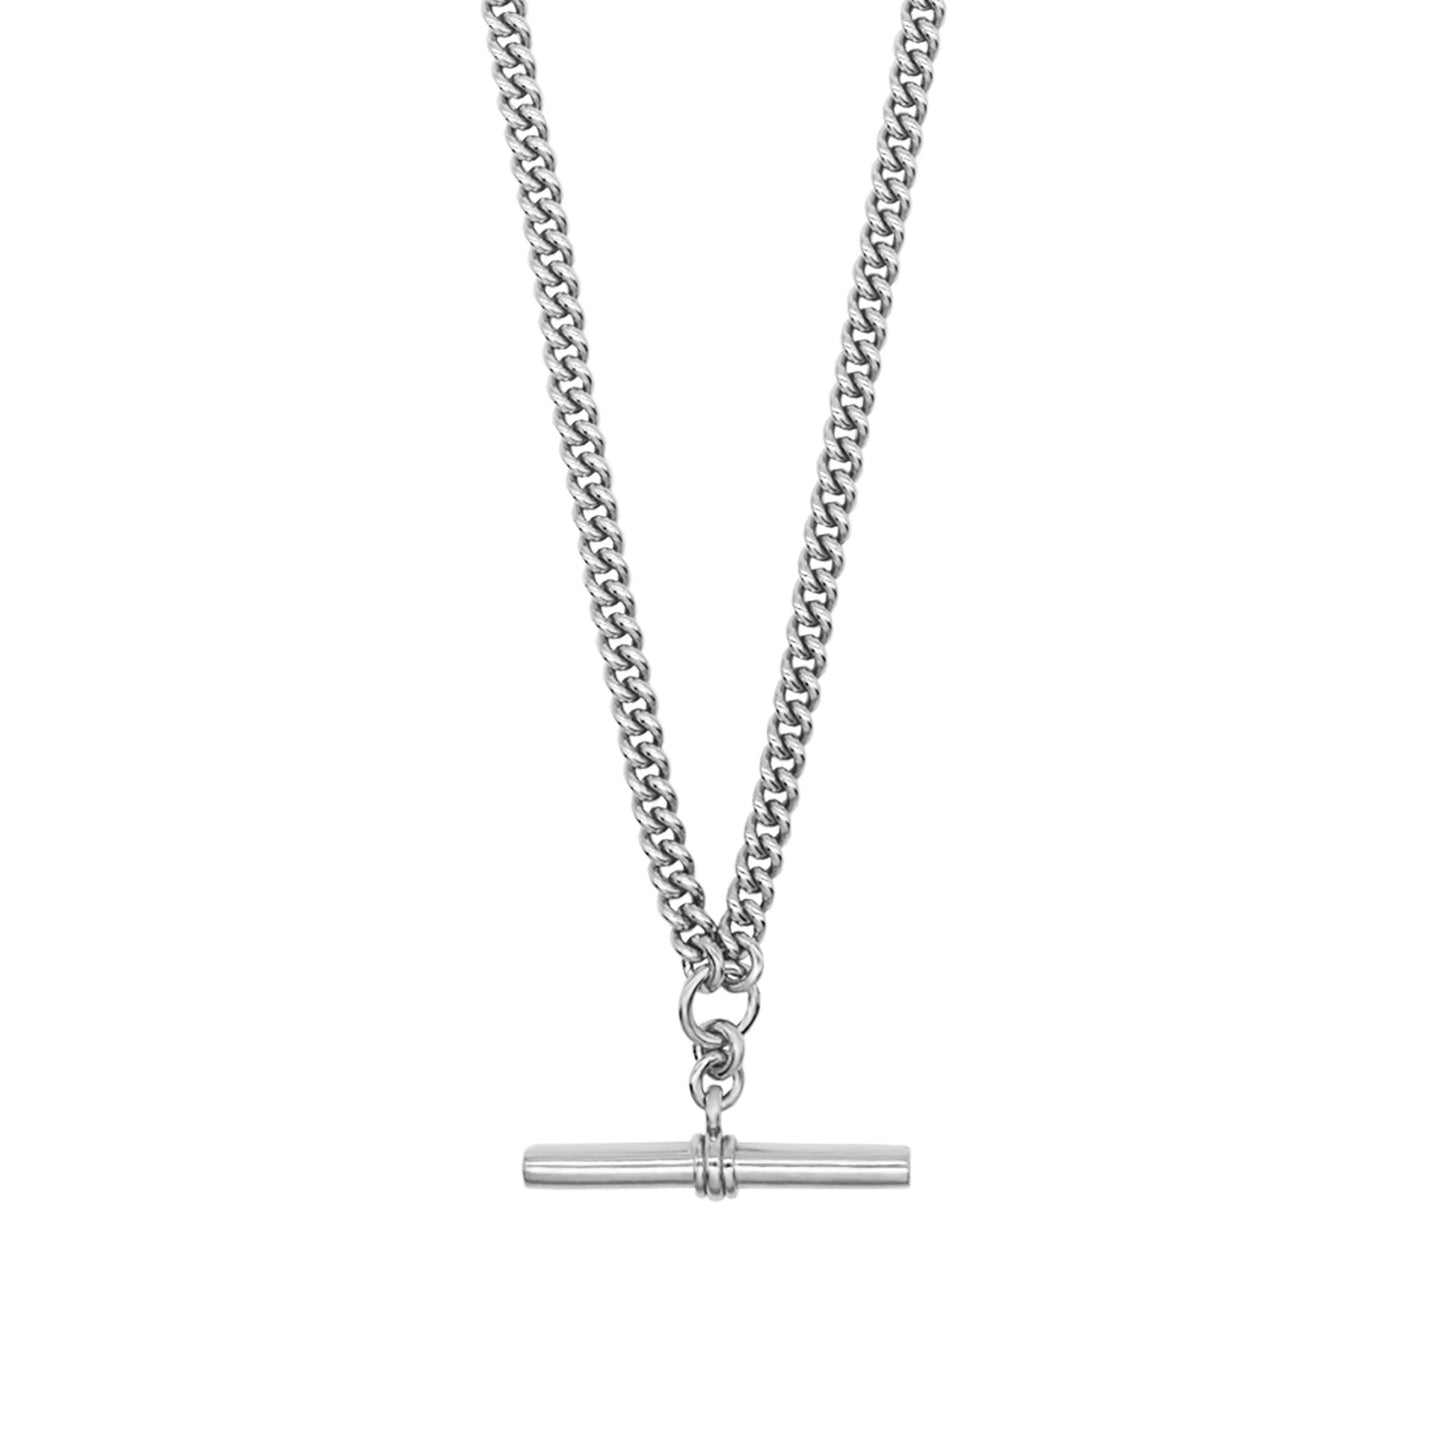 Close up of Pawnshop sterling silver T bar necklace. Curb chain detail with a T bar charm feature.